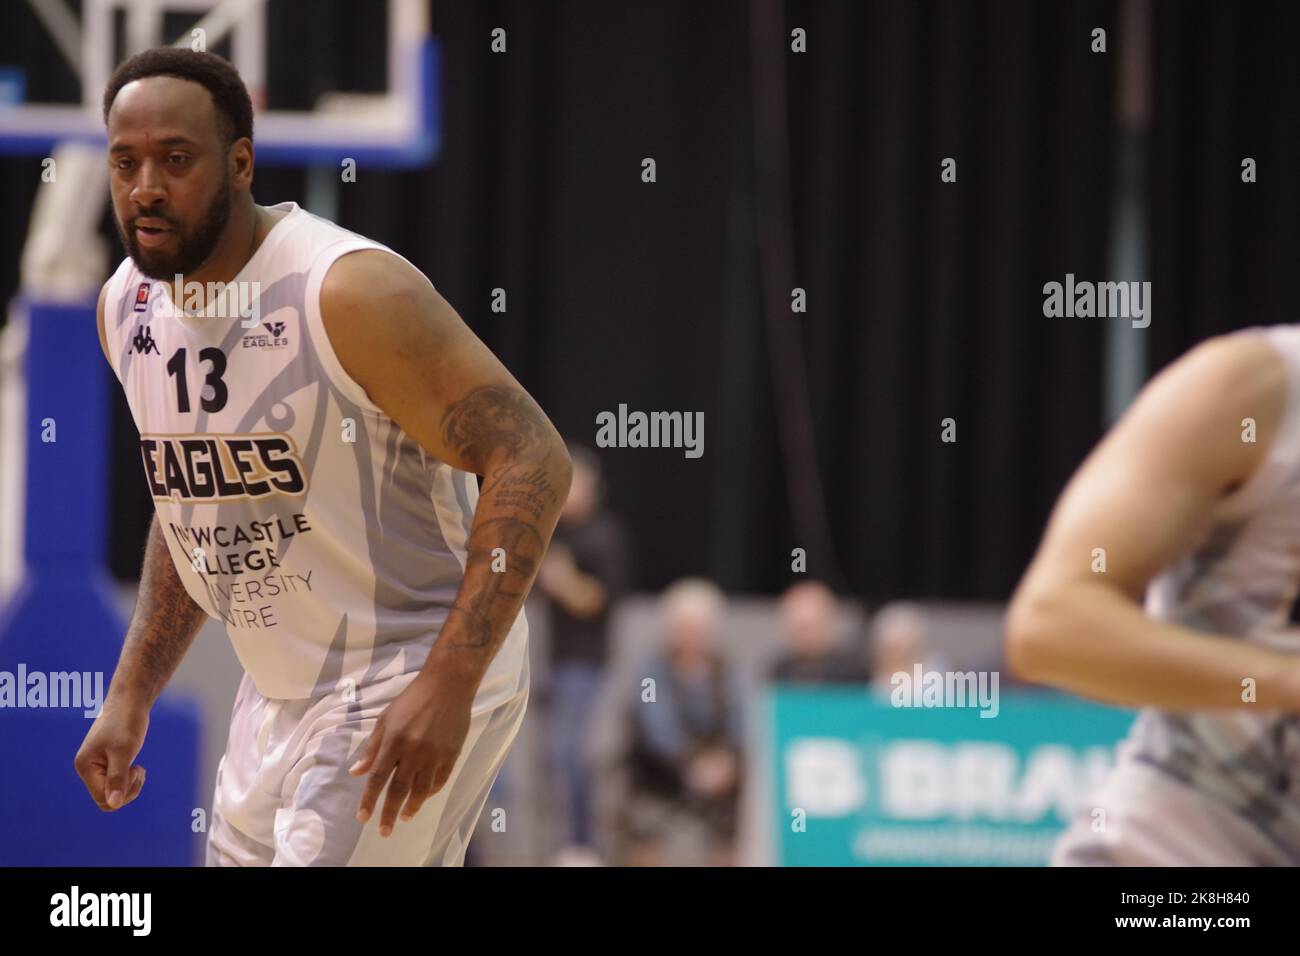 Sheffield, England, 23 October 2022. Darius Defoe playing for Newcastle Eagles against B. Braun Sheffield Sharks in a BBL match at Ponds Forge. Credit: Colin Edwards/Alamy Live News. Stock Photo